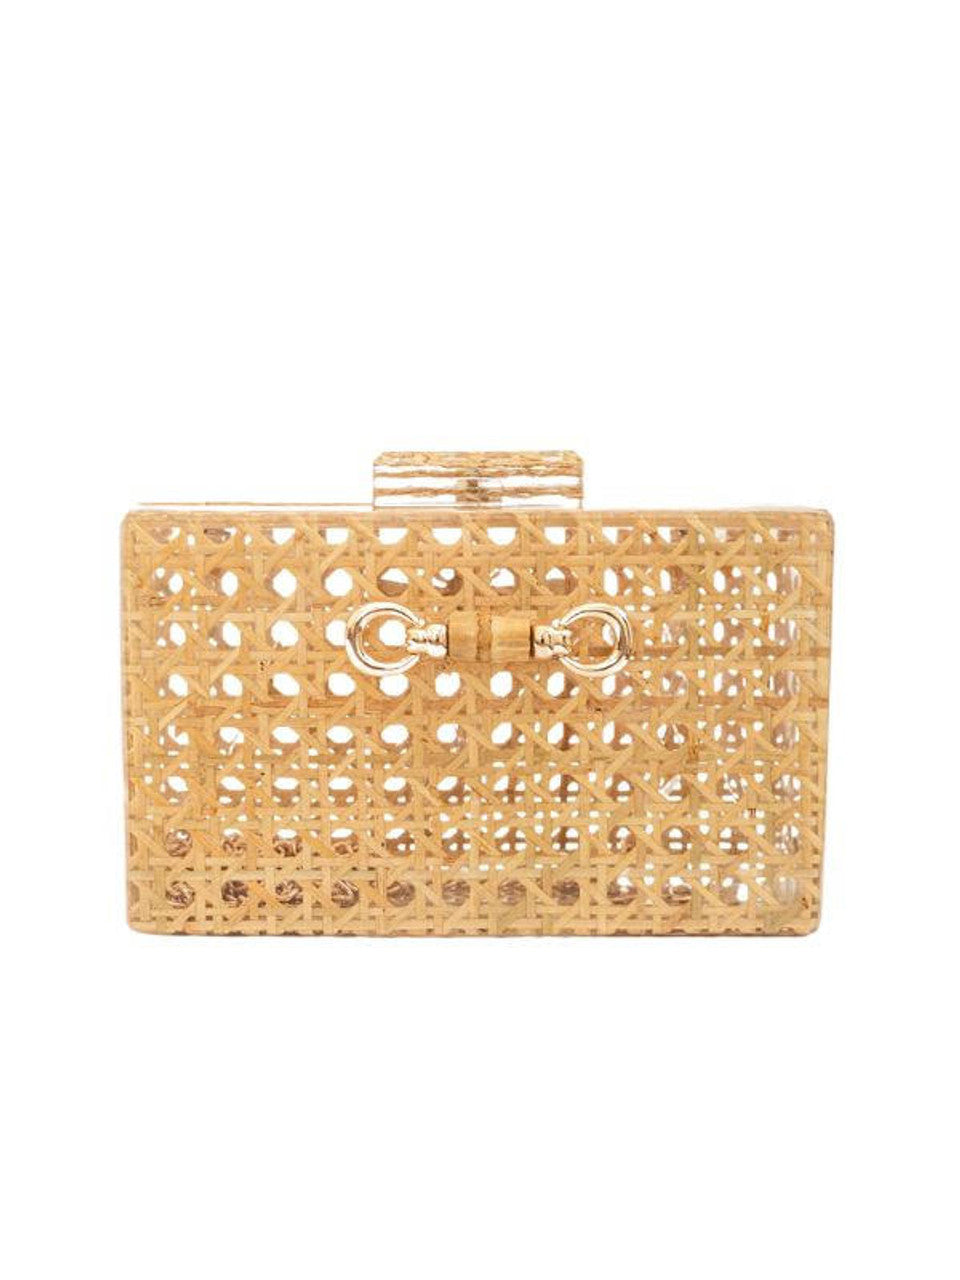 Lisi Lerch Breakers Clutch - Natural Bamboo Toggle